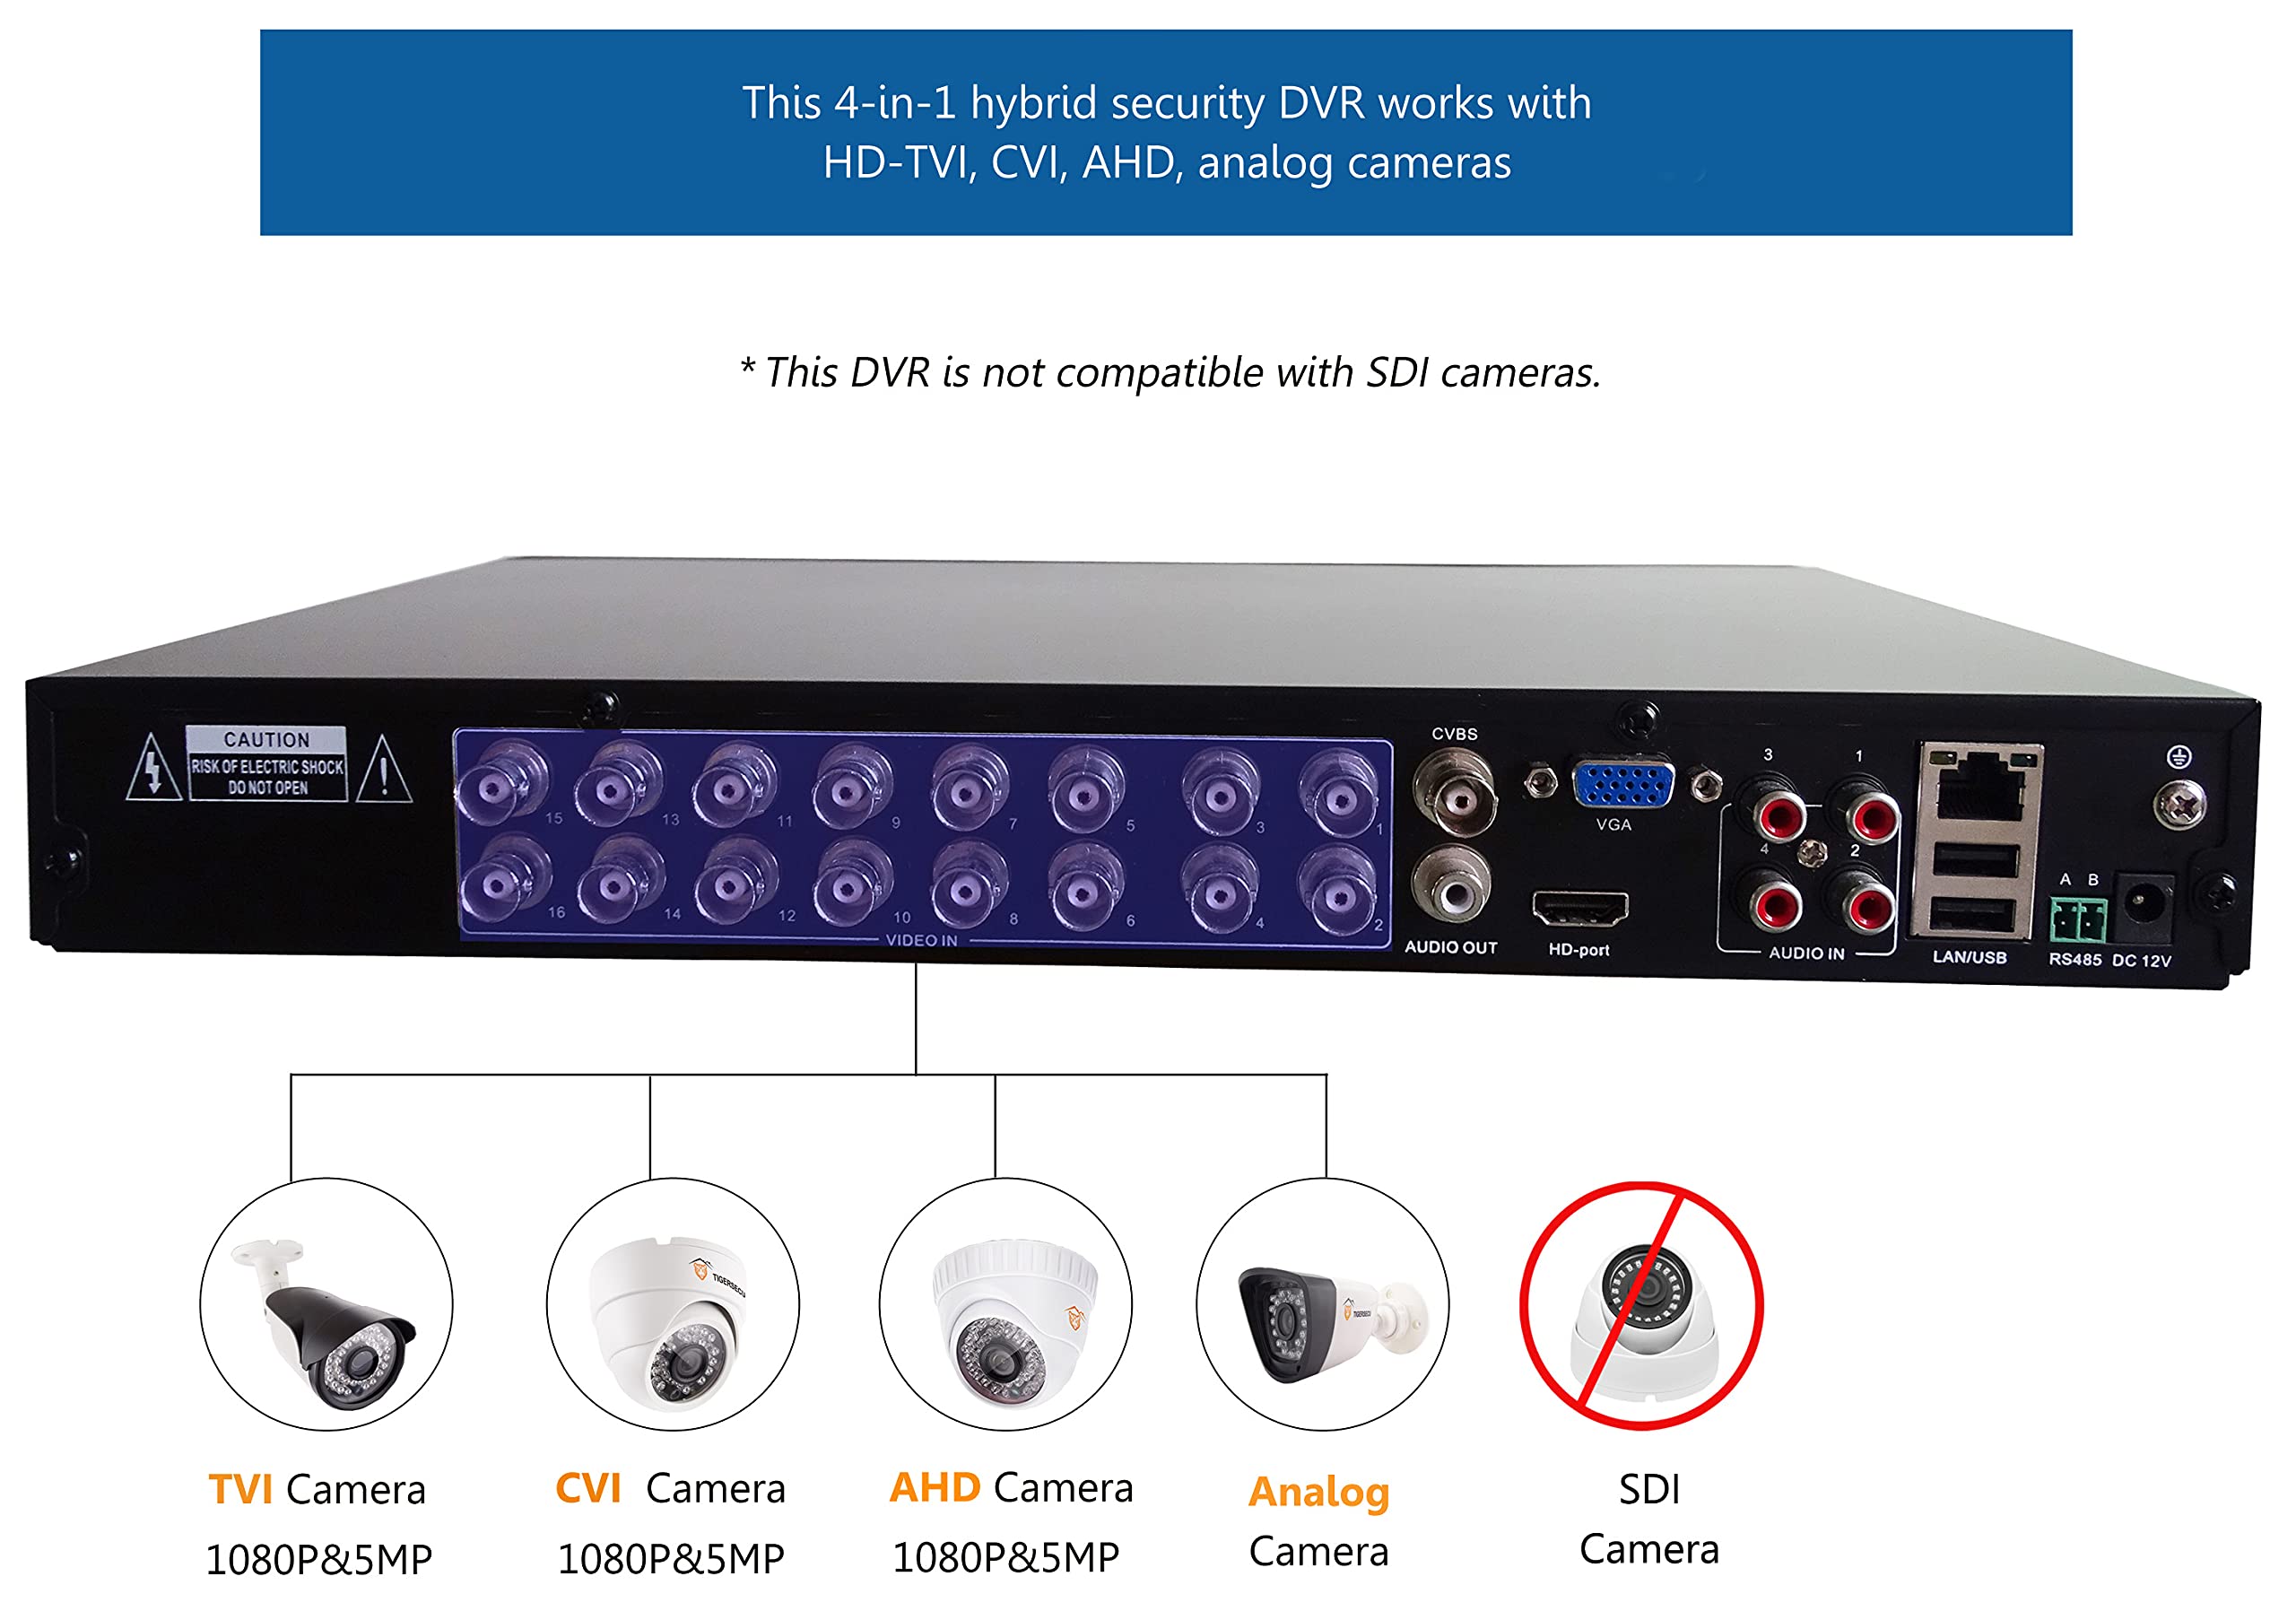 TIGERSECU Super HD 1080P 16-Channel Hybrid 4-in-1 DVR Security Recorder with 2TB Hard Drive, for 2MP TVI/AHD/CVI/Analog Cameras (Cameras Not Included)